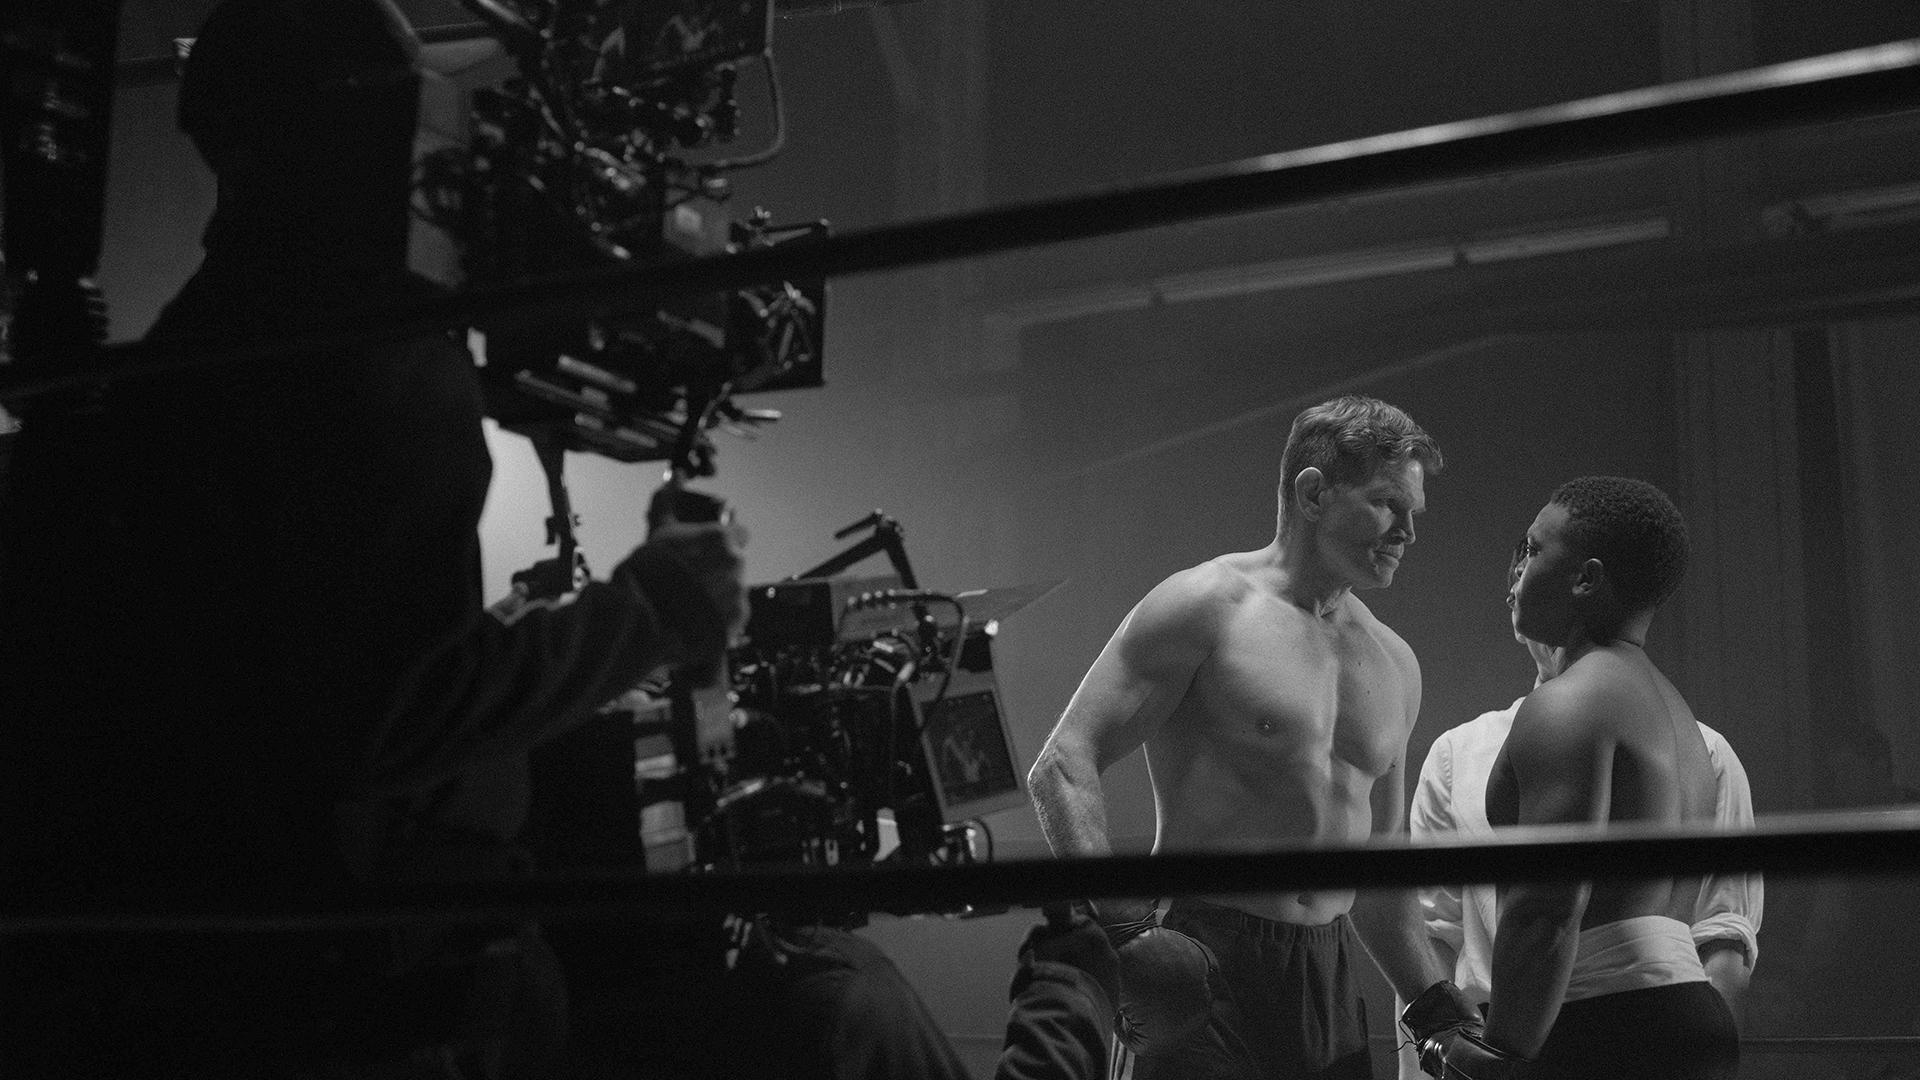 two men in the boxing ring, a movie scene